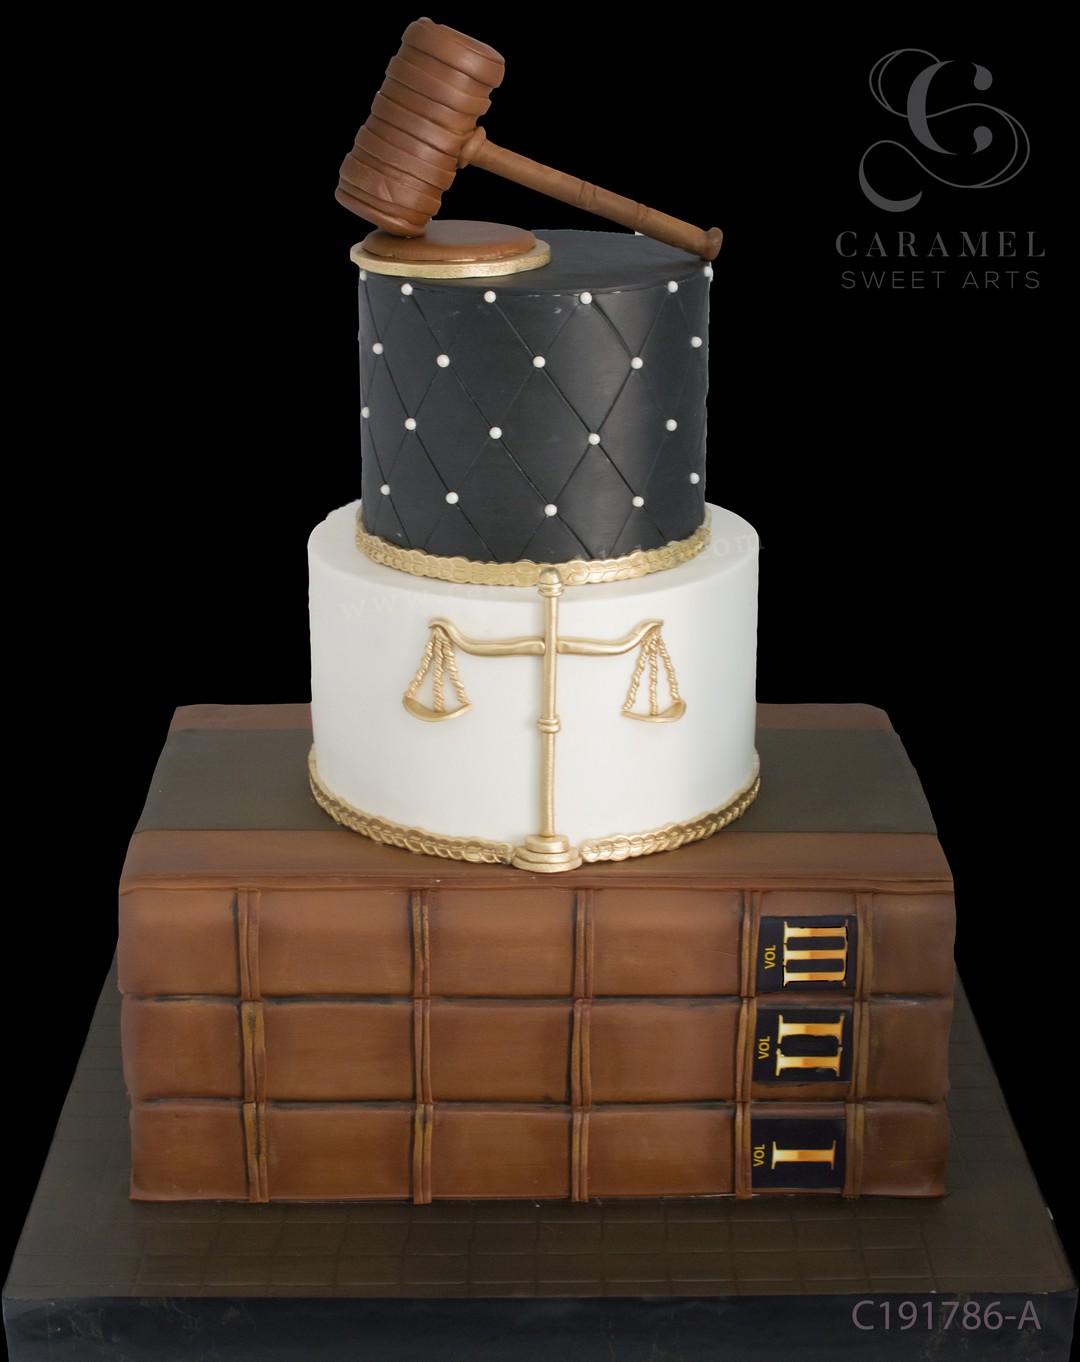 Cakes By Profession Lawyer Cakes - Order Online with FlavoursGuru